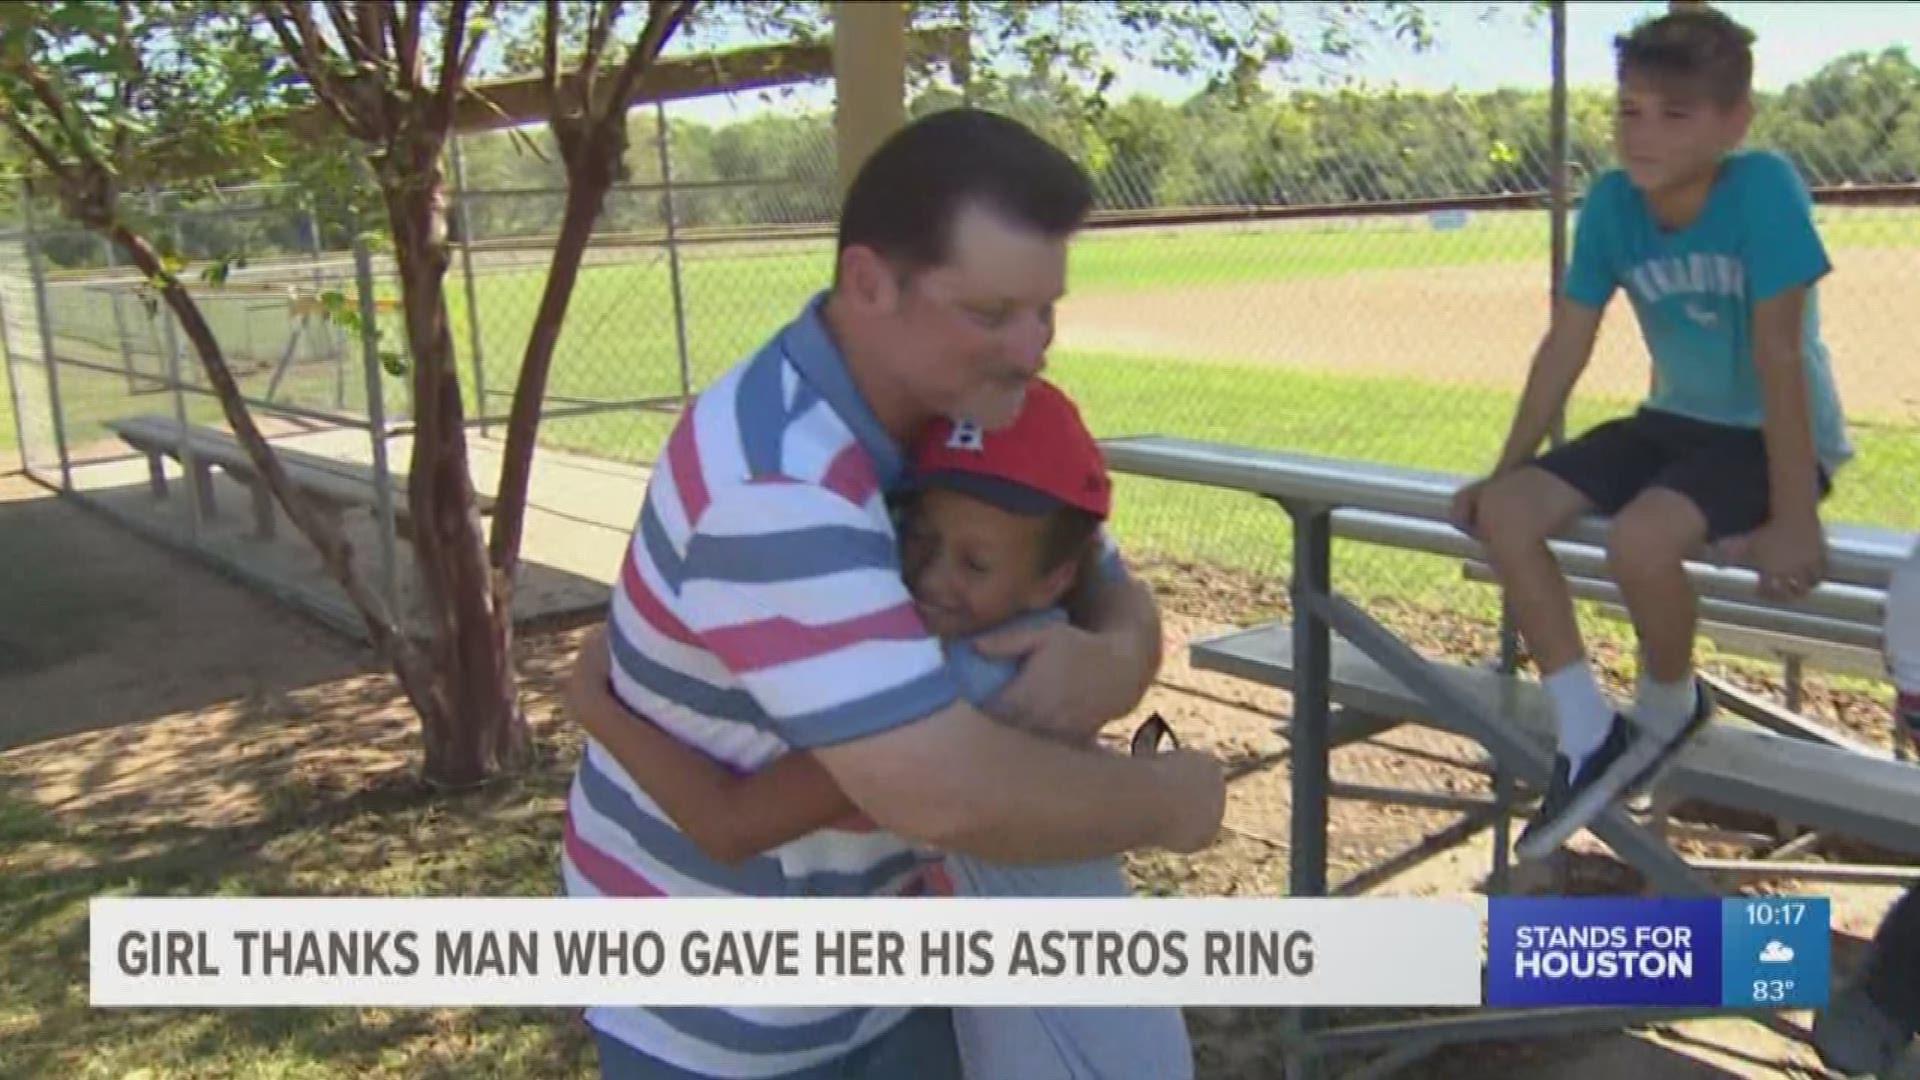 The search for the kind Astros fan who gave his World Series replica ring to a little girl after she had lost hers has been found.